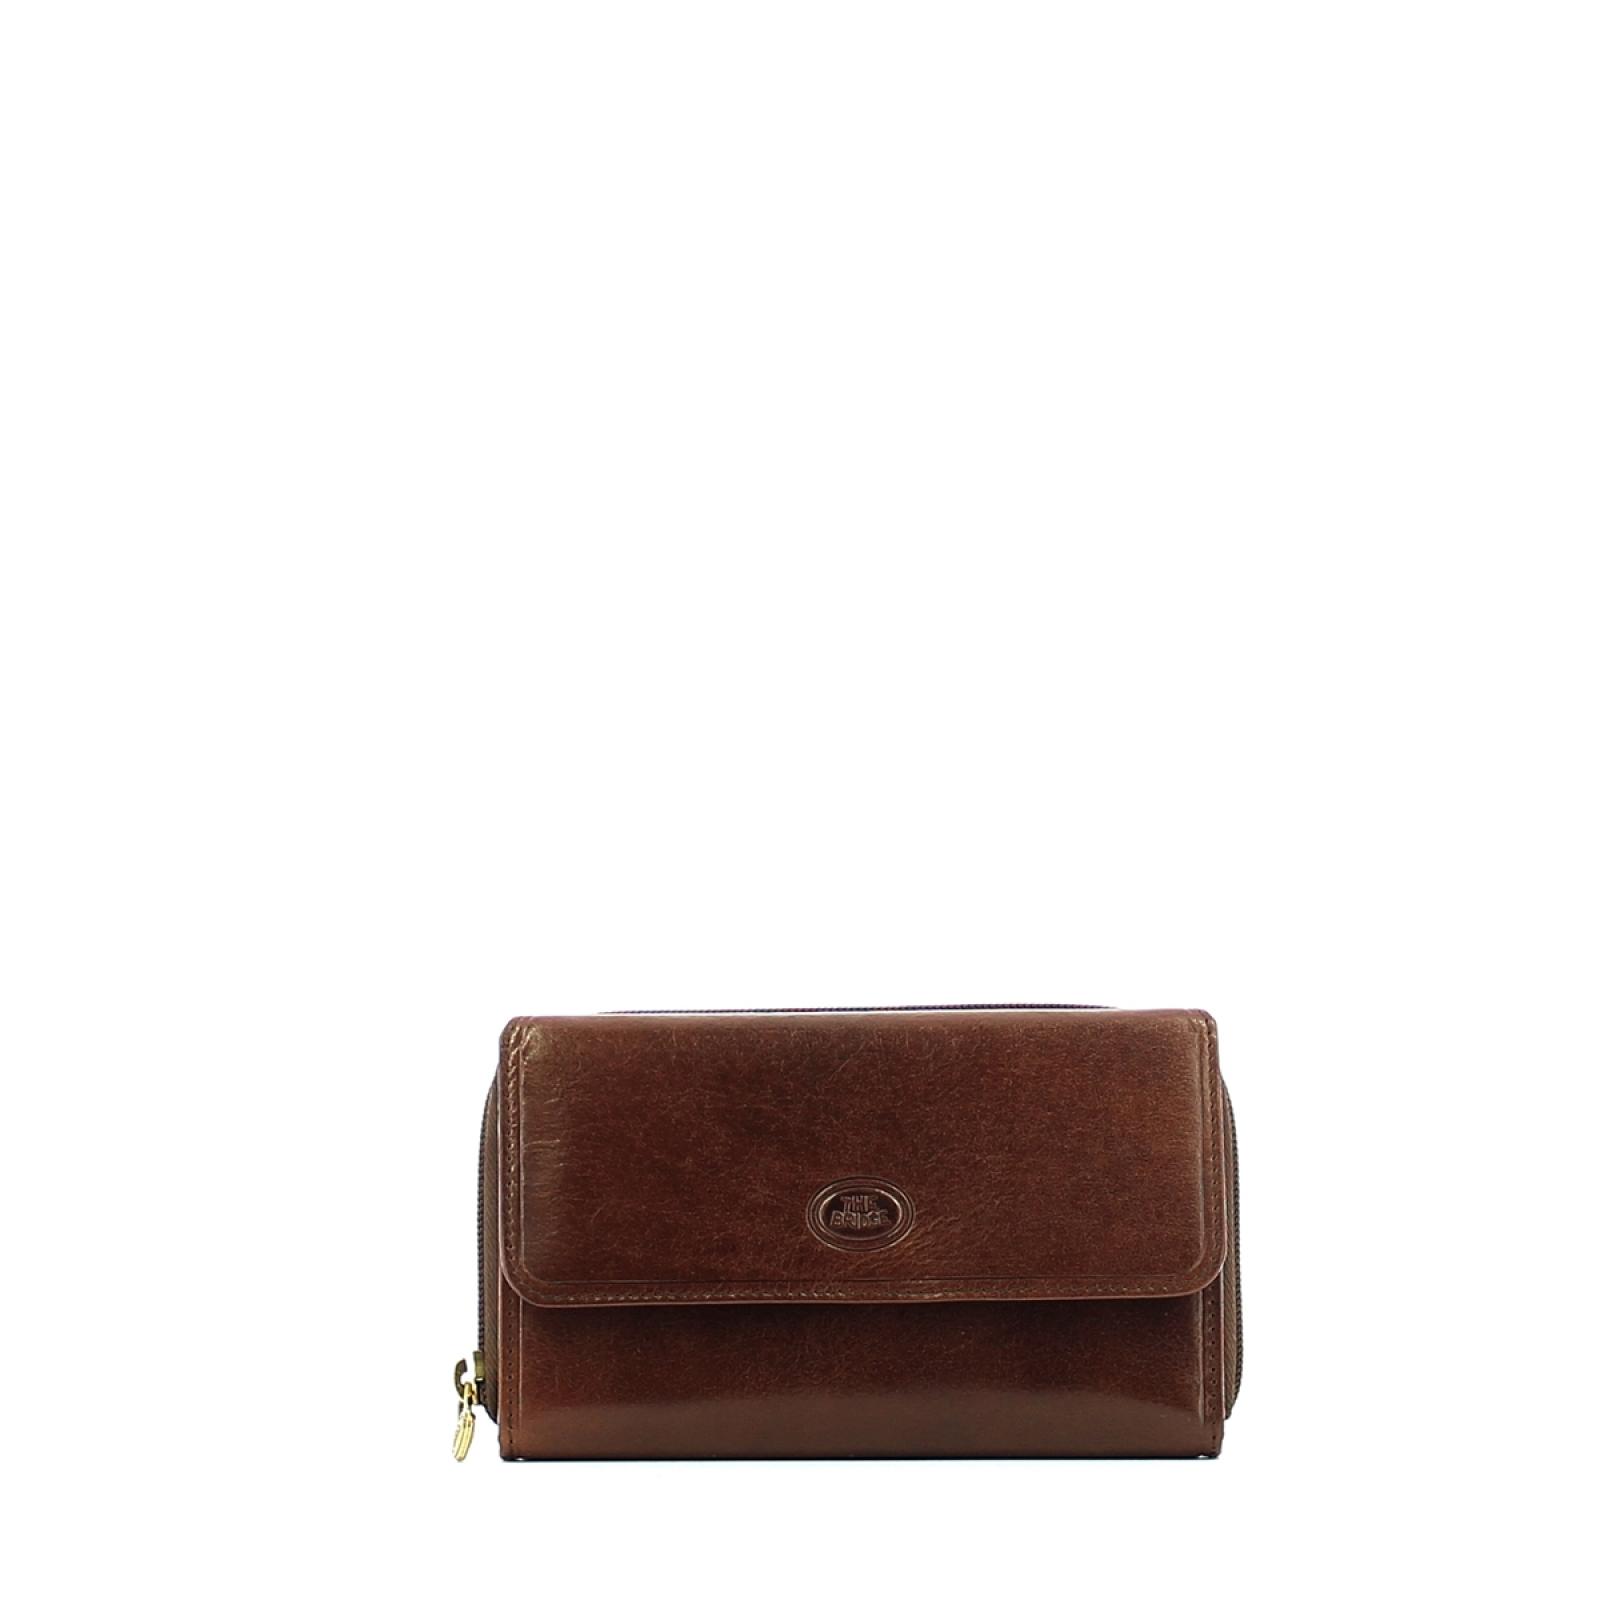 Woman Wallet Story-CUOIO-UN